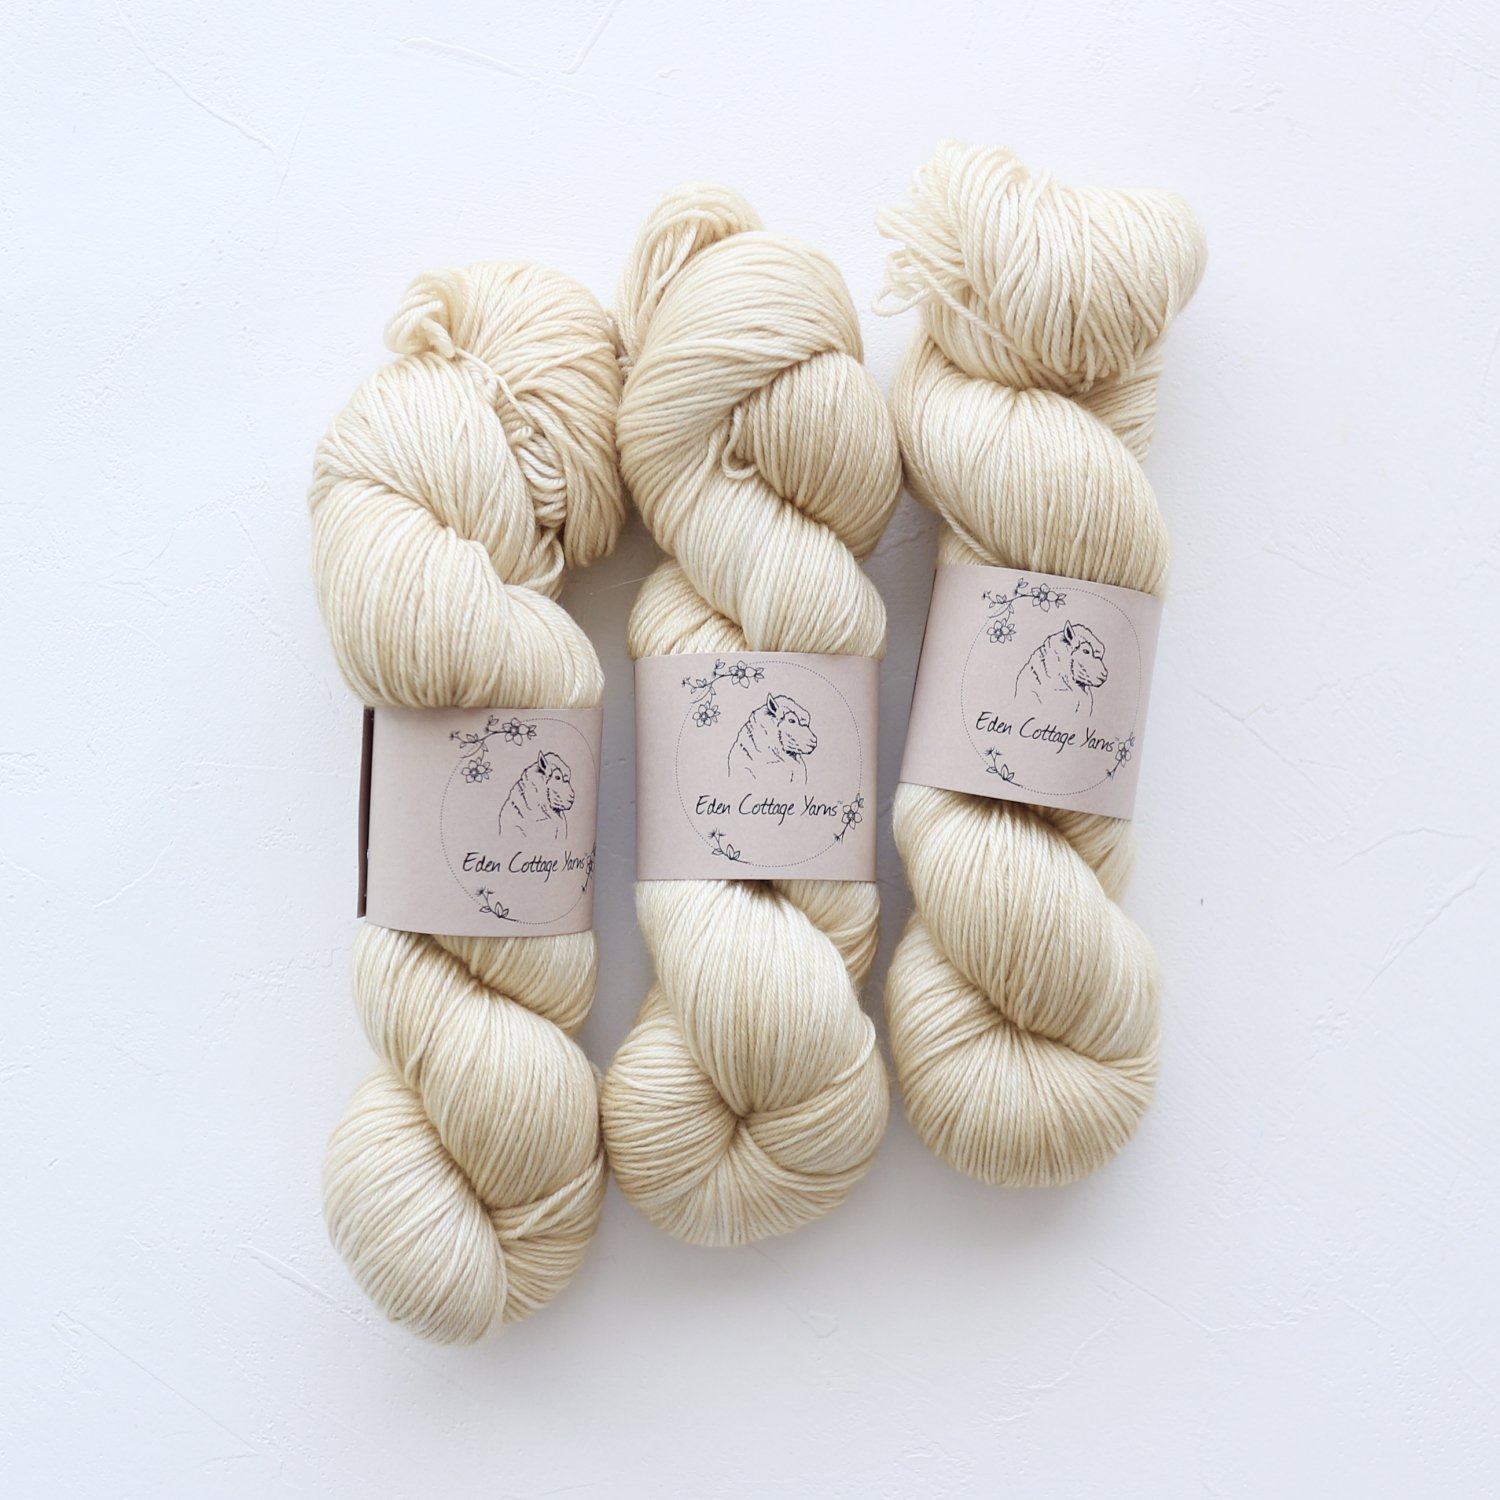 【Eden Cottage Yarns】<br>Pendle 4ply<br>Whispering Grass